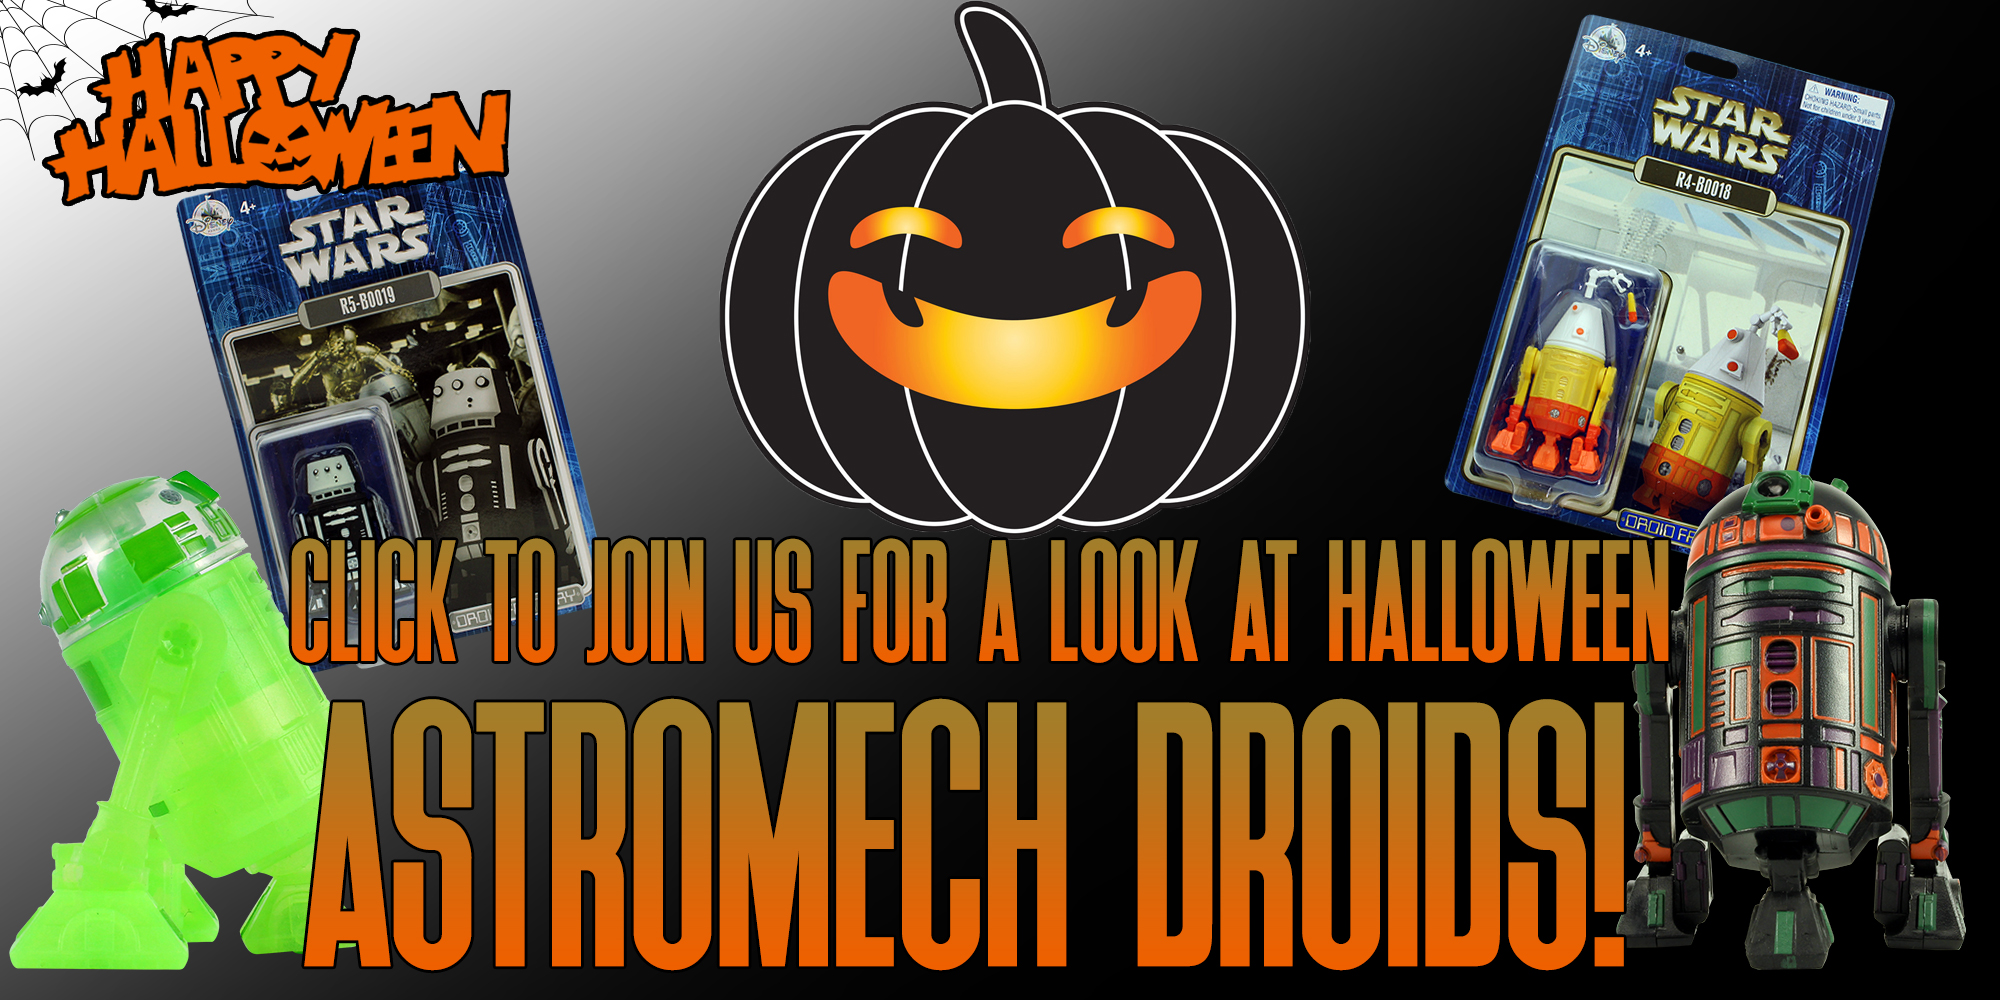 Happy Halloween! Here Is A Look At Halloween Astromech Droids!